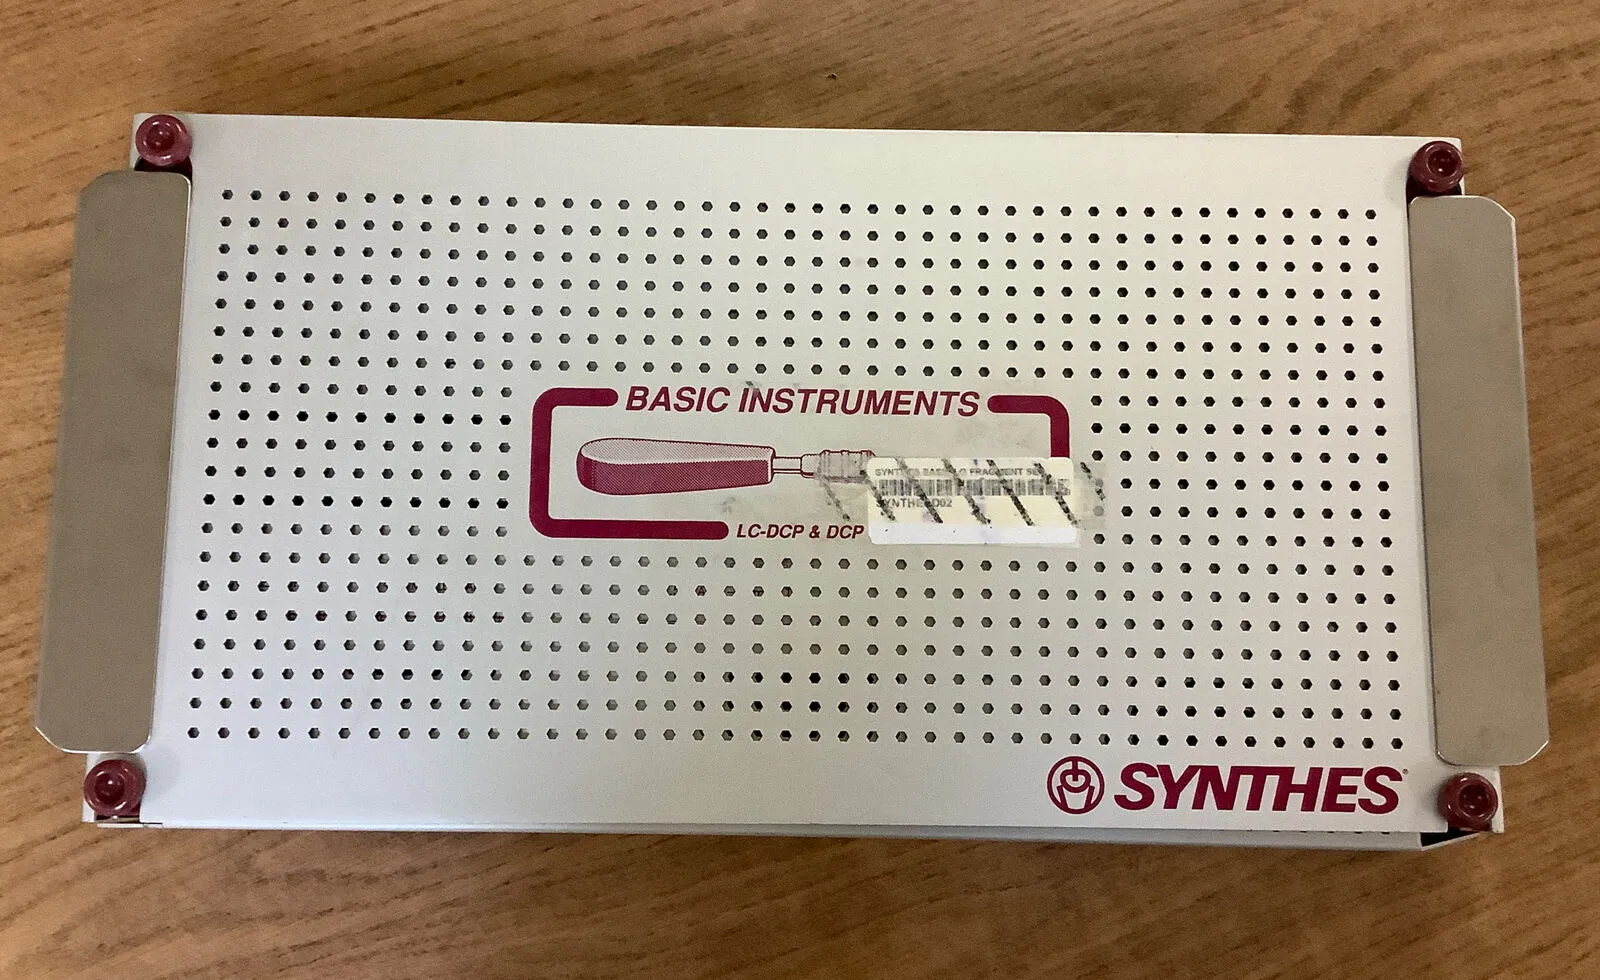 Synthes ASIF Orthopedic Self Tapping And Case Basic Instruments Surgical Screws